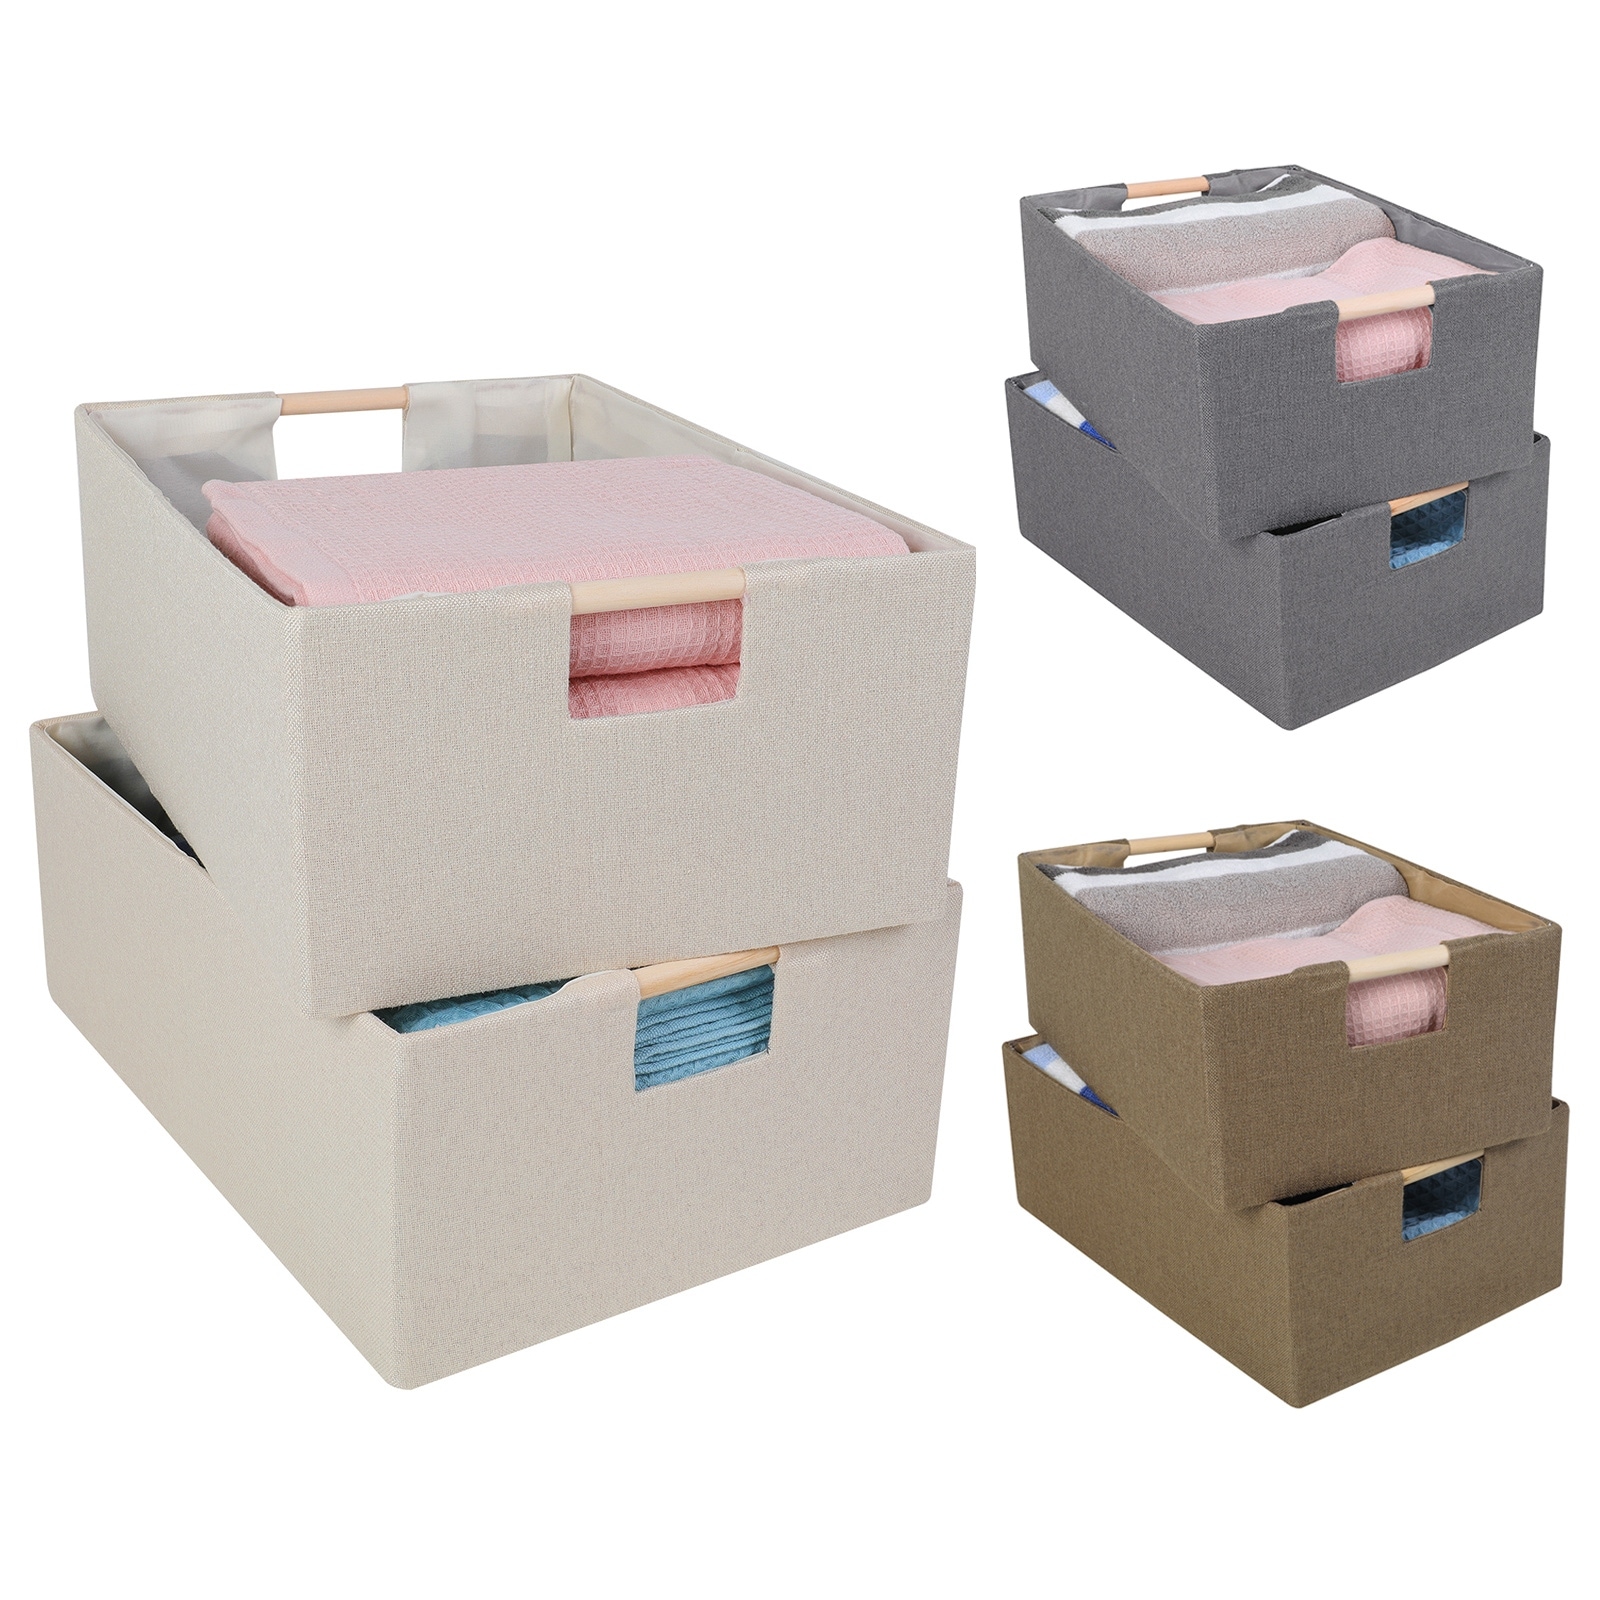 https://ak1.ostkcdn.com/images/products/is/images/direct/78459845640166c3a429c4f008976ab19410dd8f/Fabric-Foldable-Storage-Bins-Organizer-Container-W-Wood-Handles-2Pcs.jpg